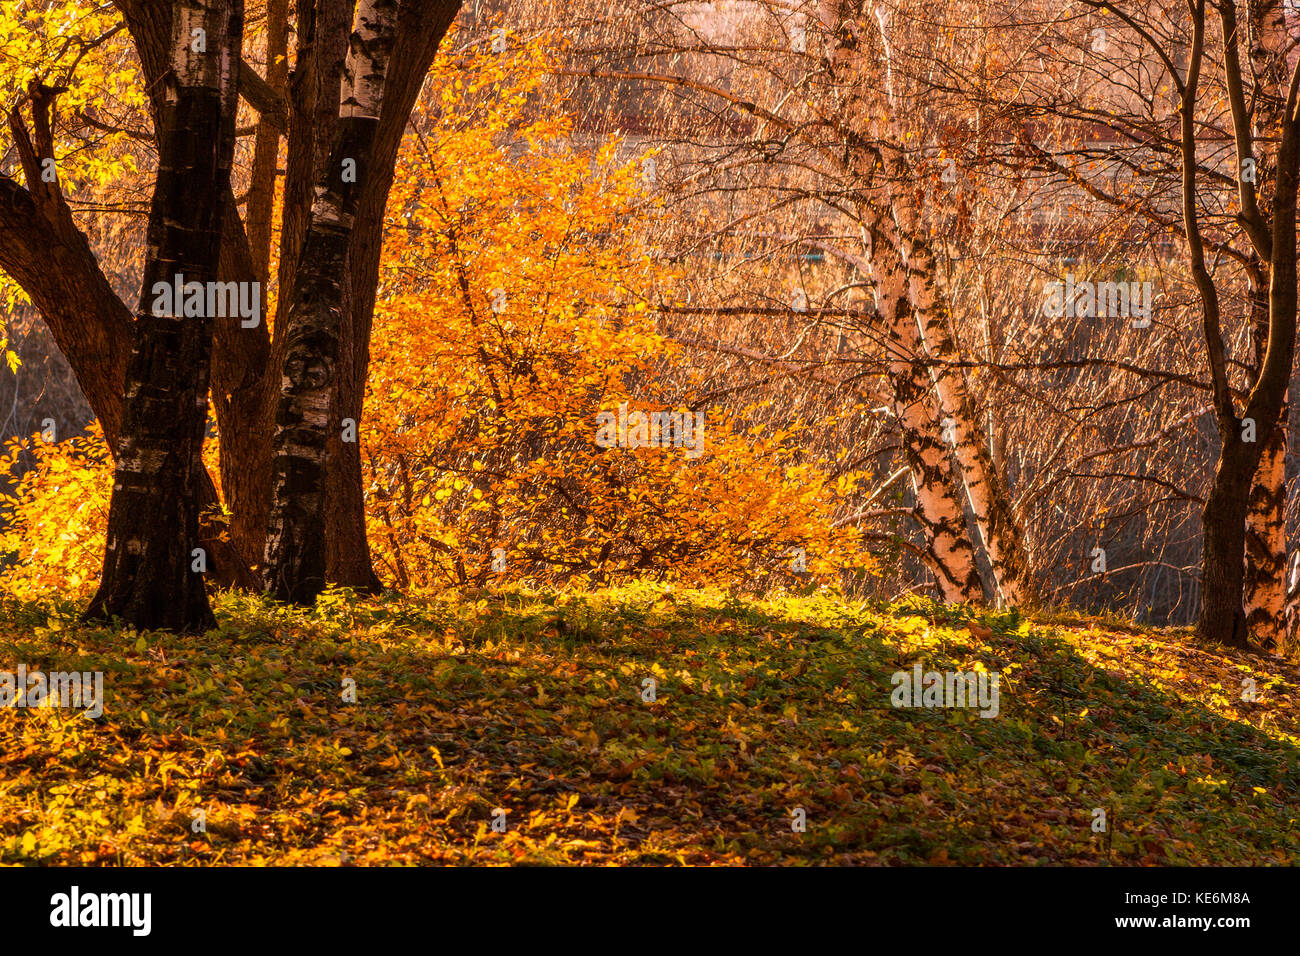 Maple and birch trees in a park by an autumn day with yellow, green and red leaves and grass around covered by foliage. Stock Photo